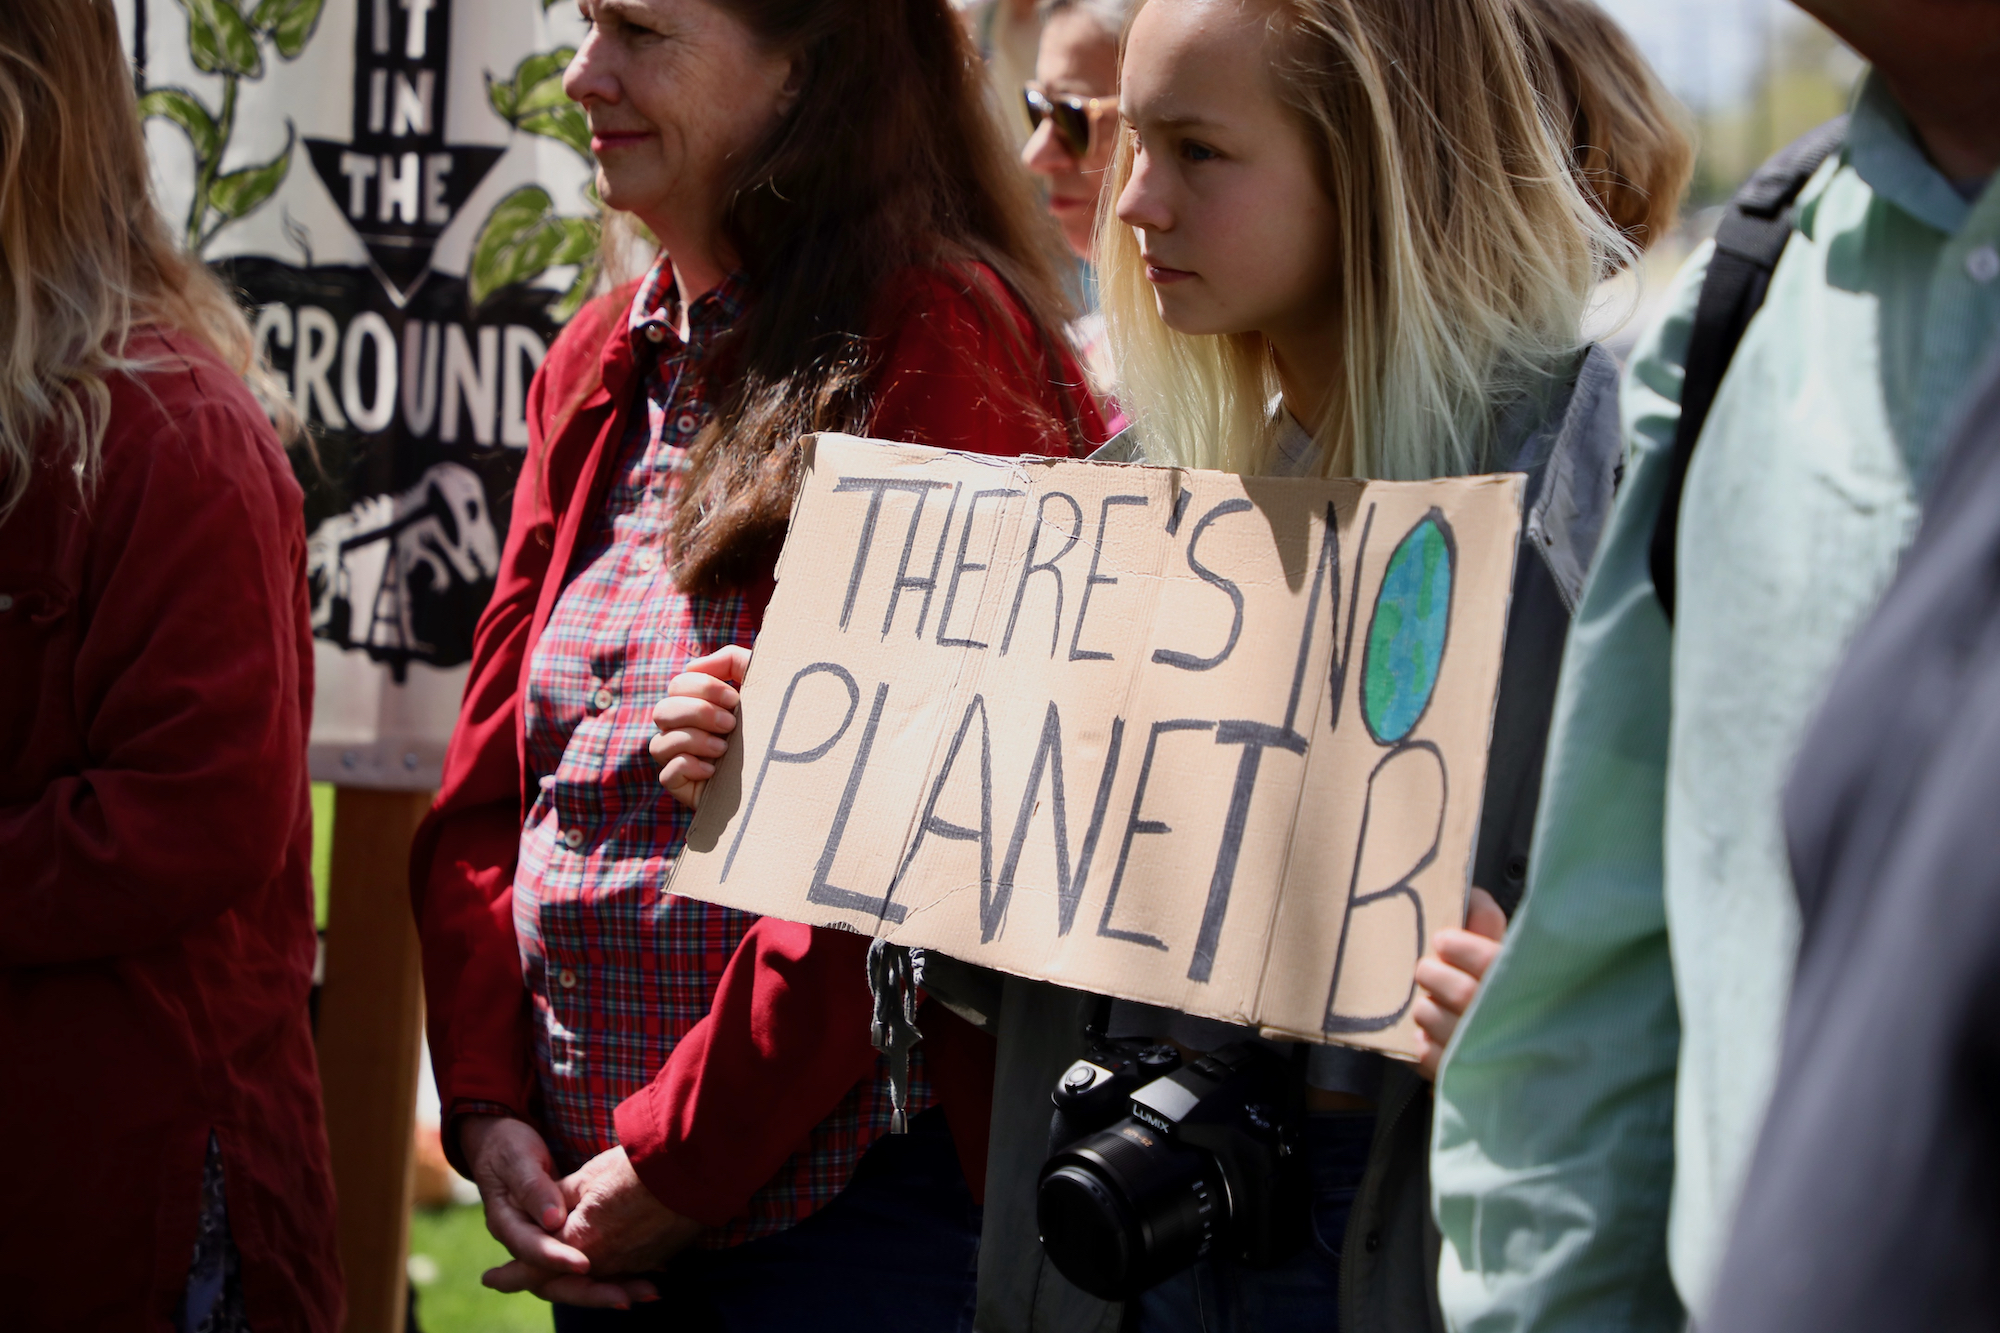 Youth activist holds up sign that says "There's No Planet B"